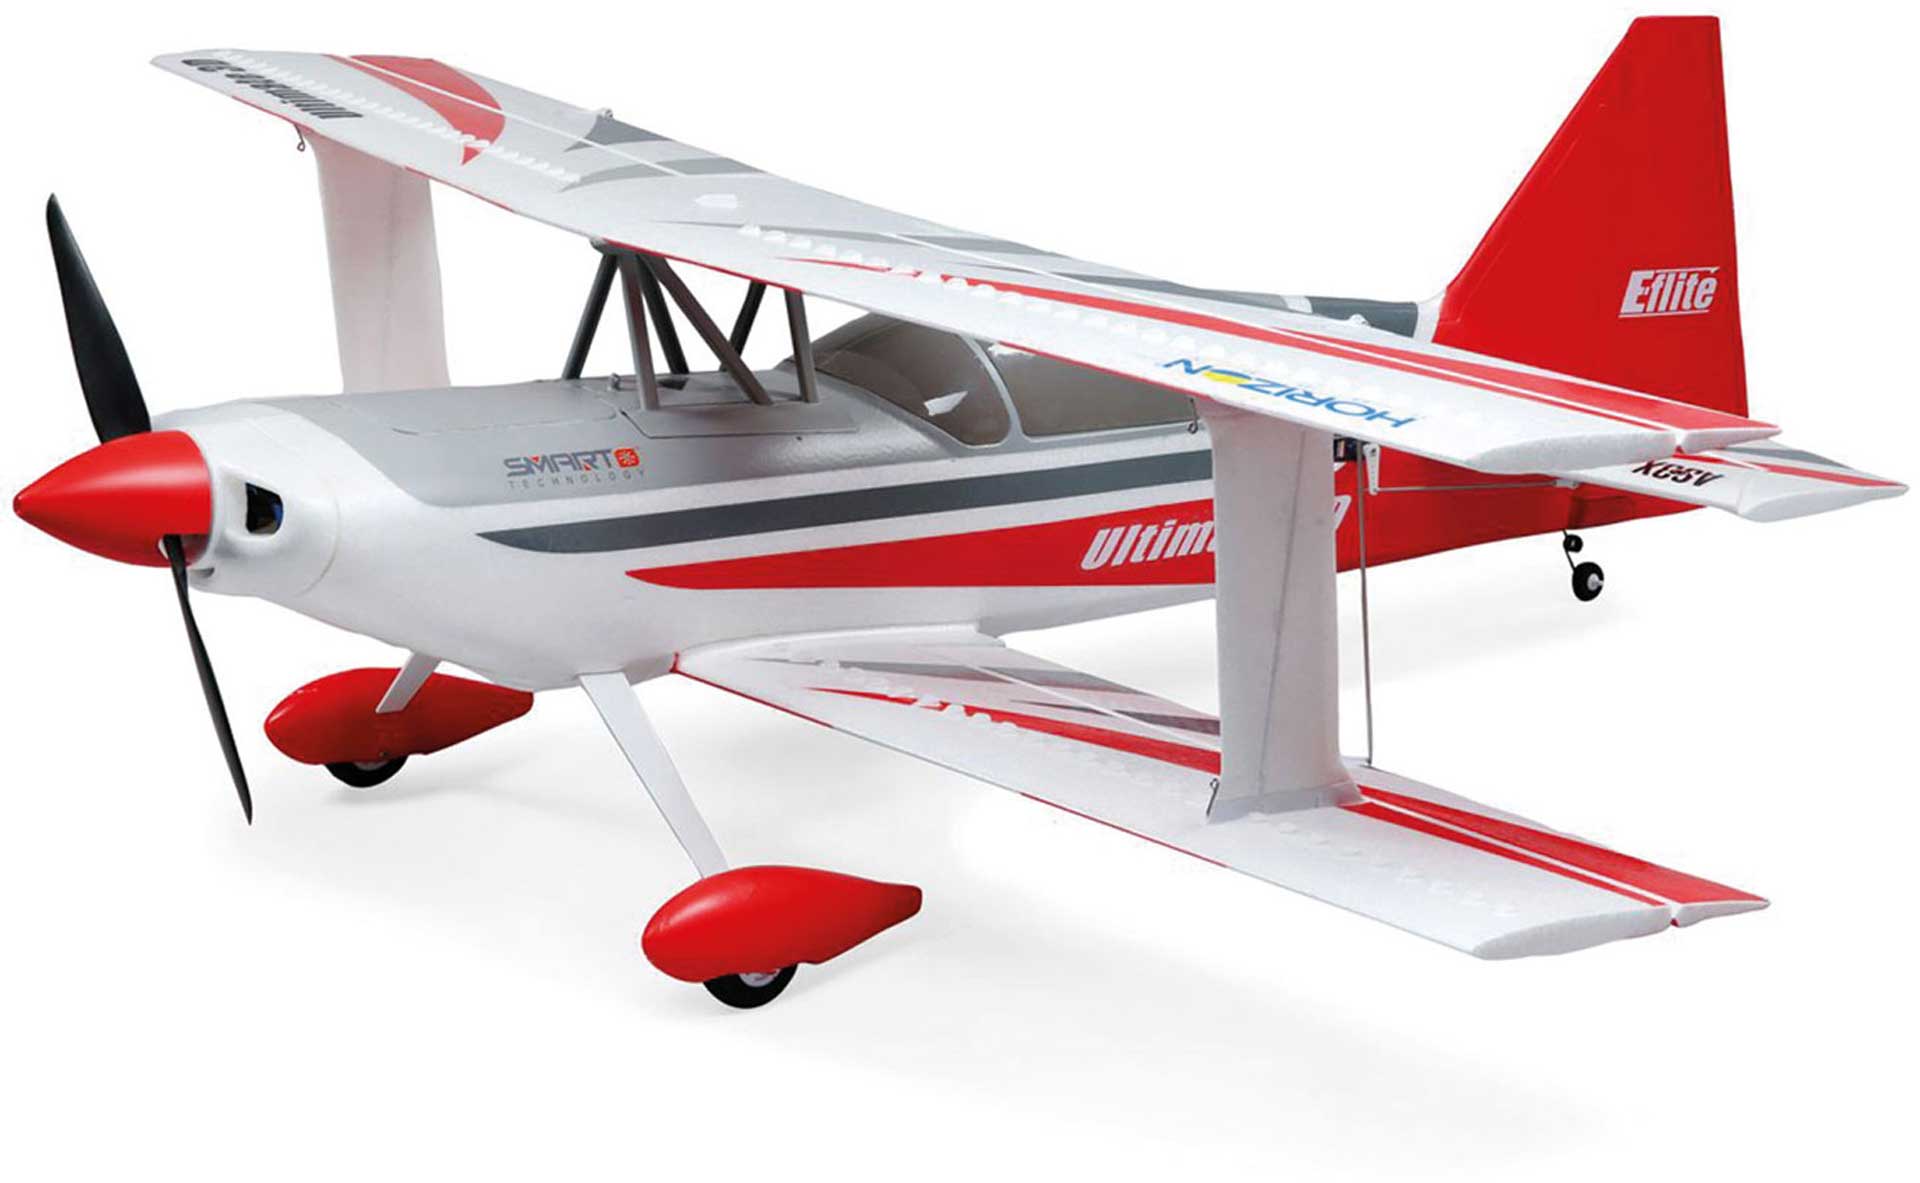 E-FLITE ULTIMATE 3D 950mm with Smart BNF Basic AS3X and safe